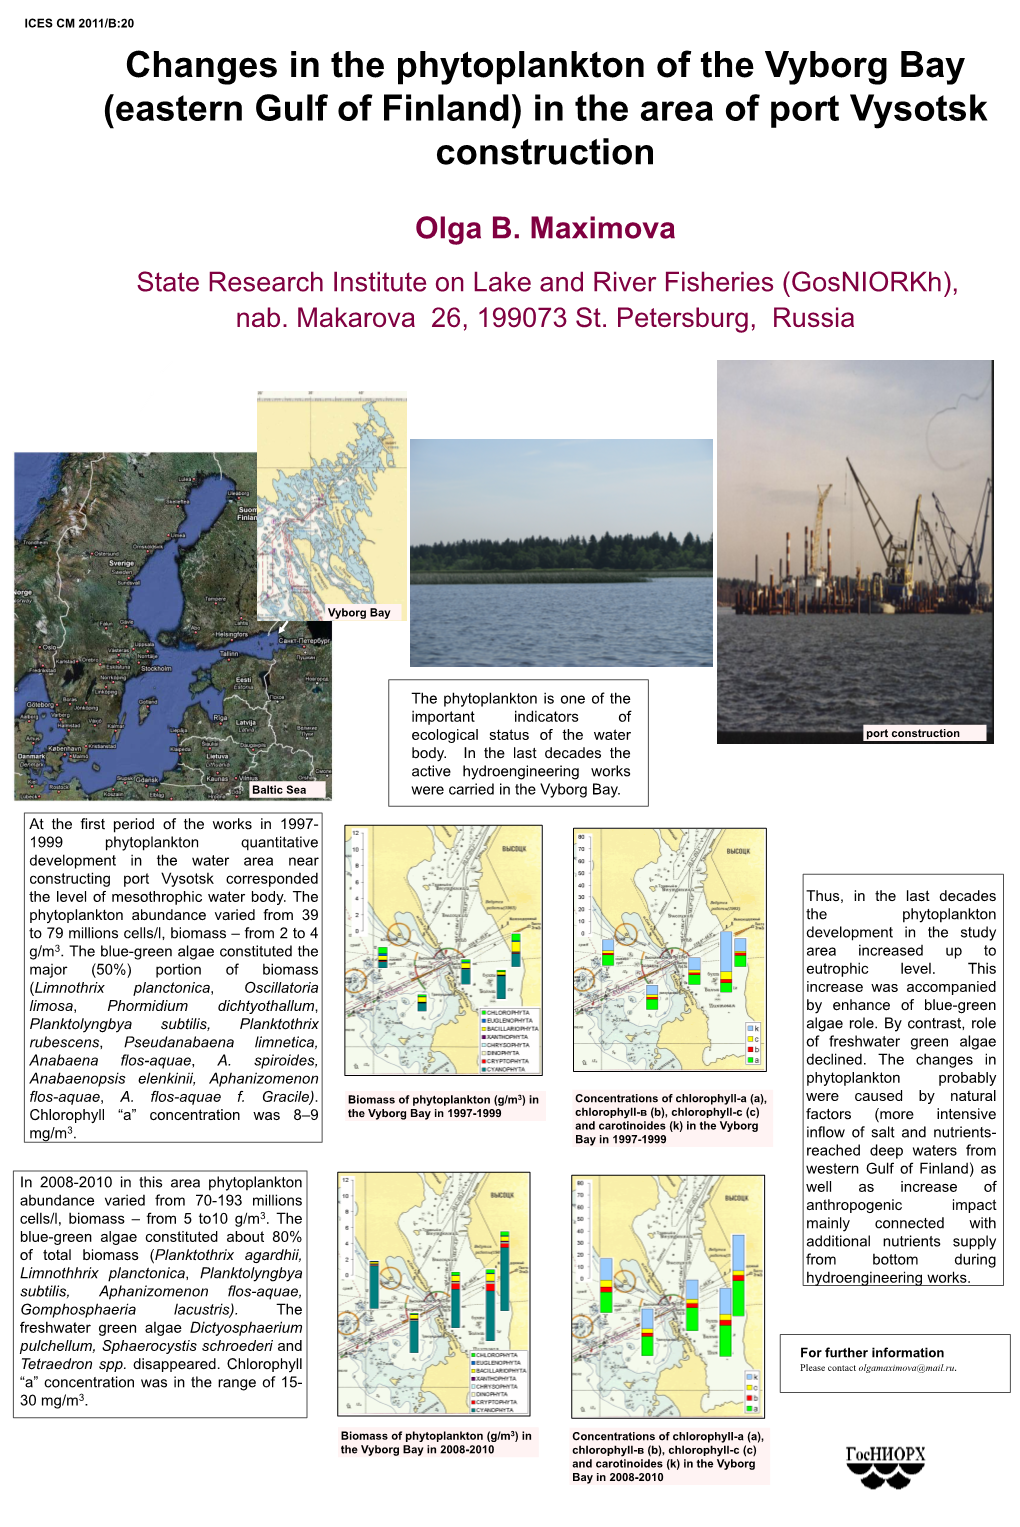 Changes in the Phytoplankton of the Vyborg Bay (Eastern Gulf of Finland) in the Area of Port Vysotsk Construction. ICES CM 2011